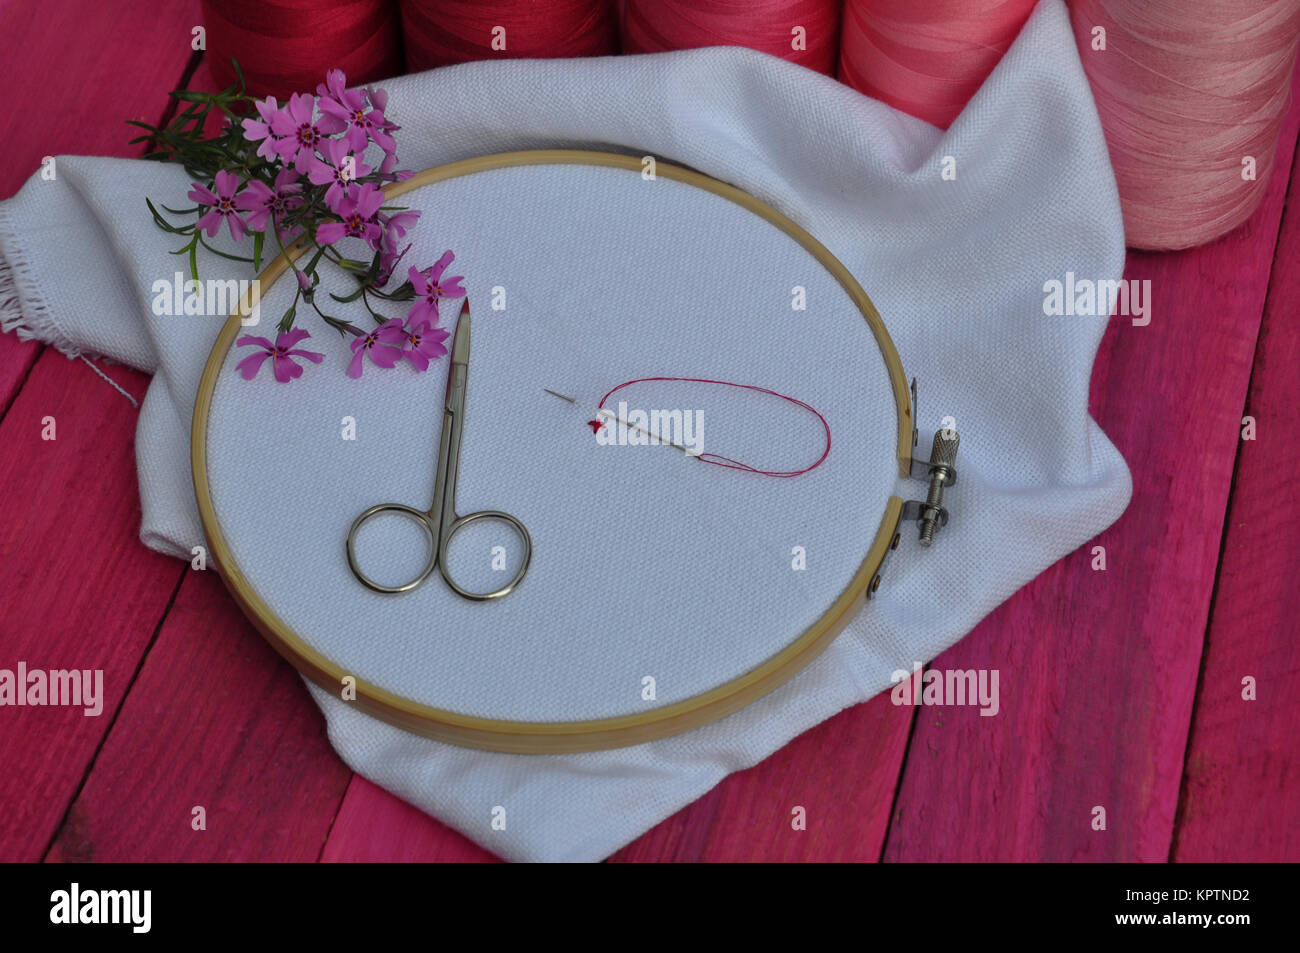 Embroidery And Cross Stitch Accessories On Pink Background Flat Lay Stock  Photo - Download Image Now - iStock